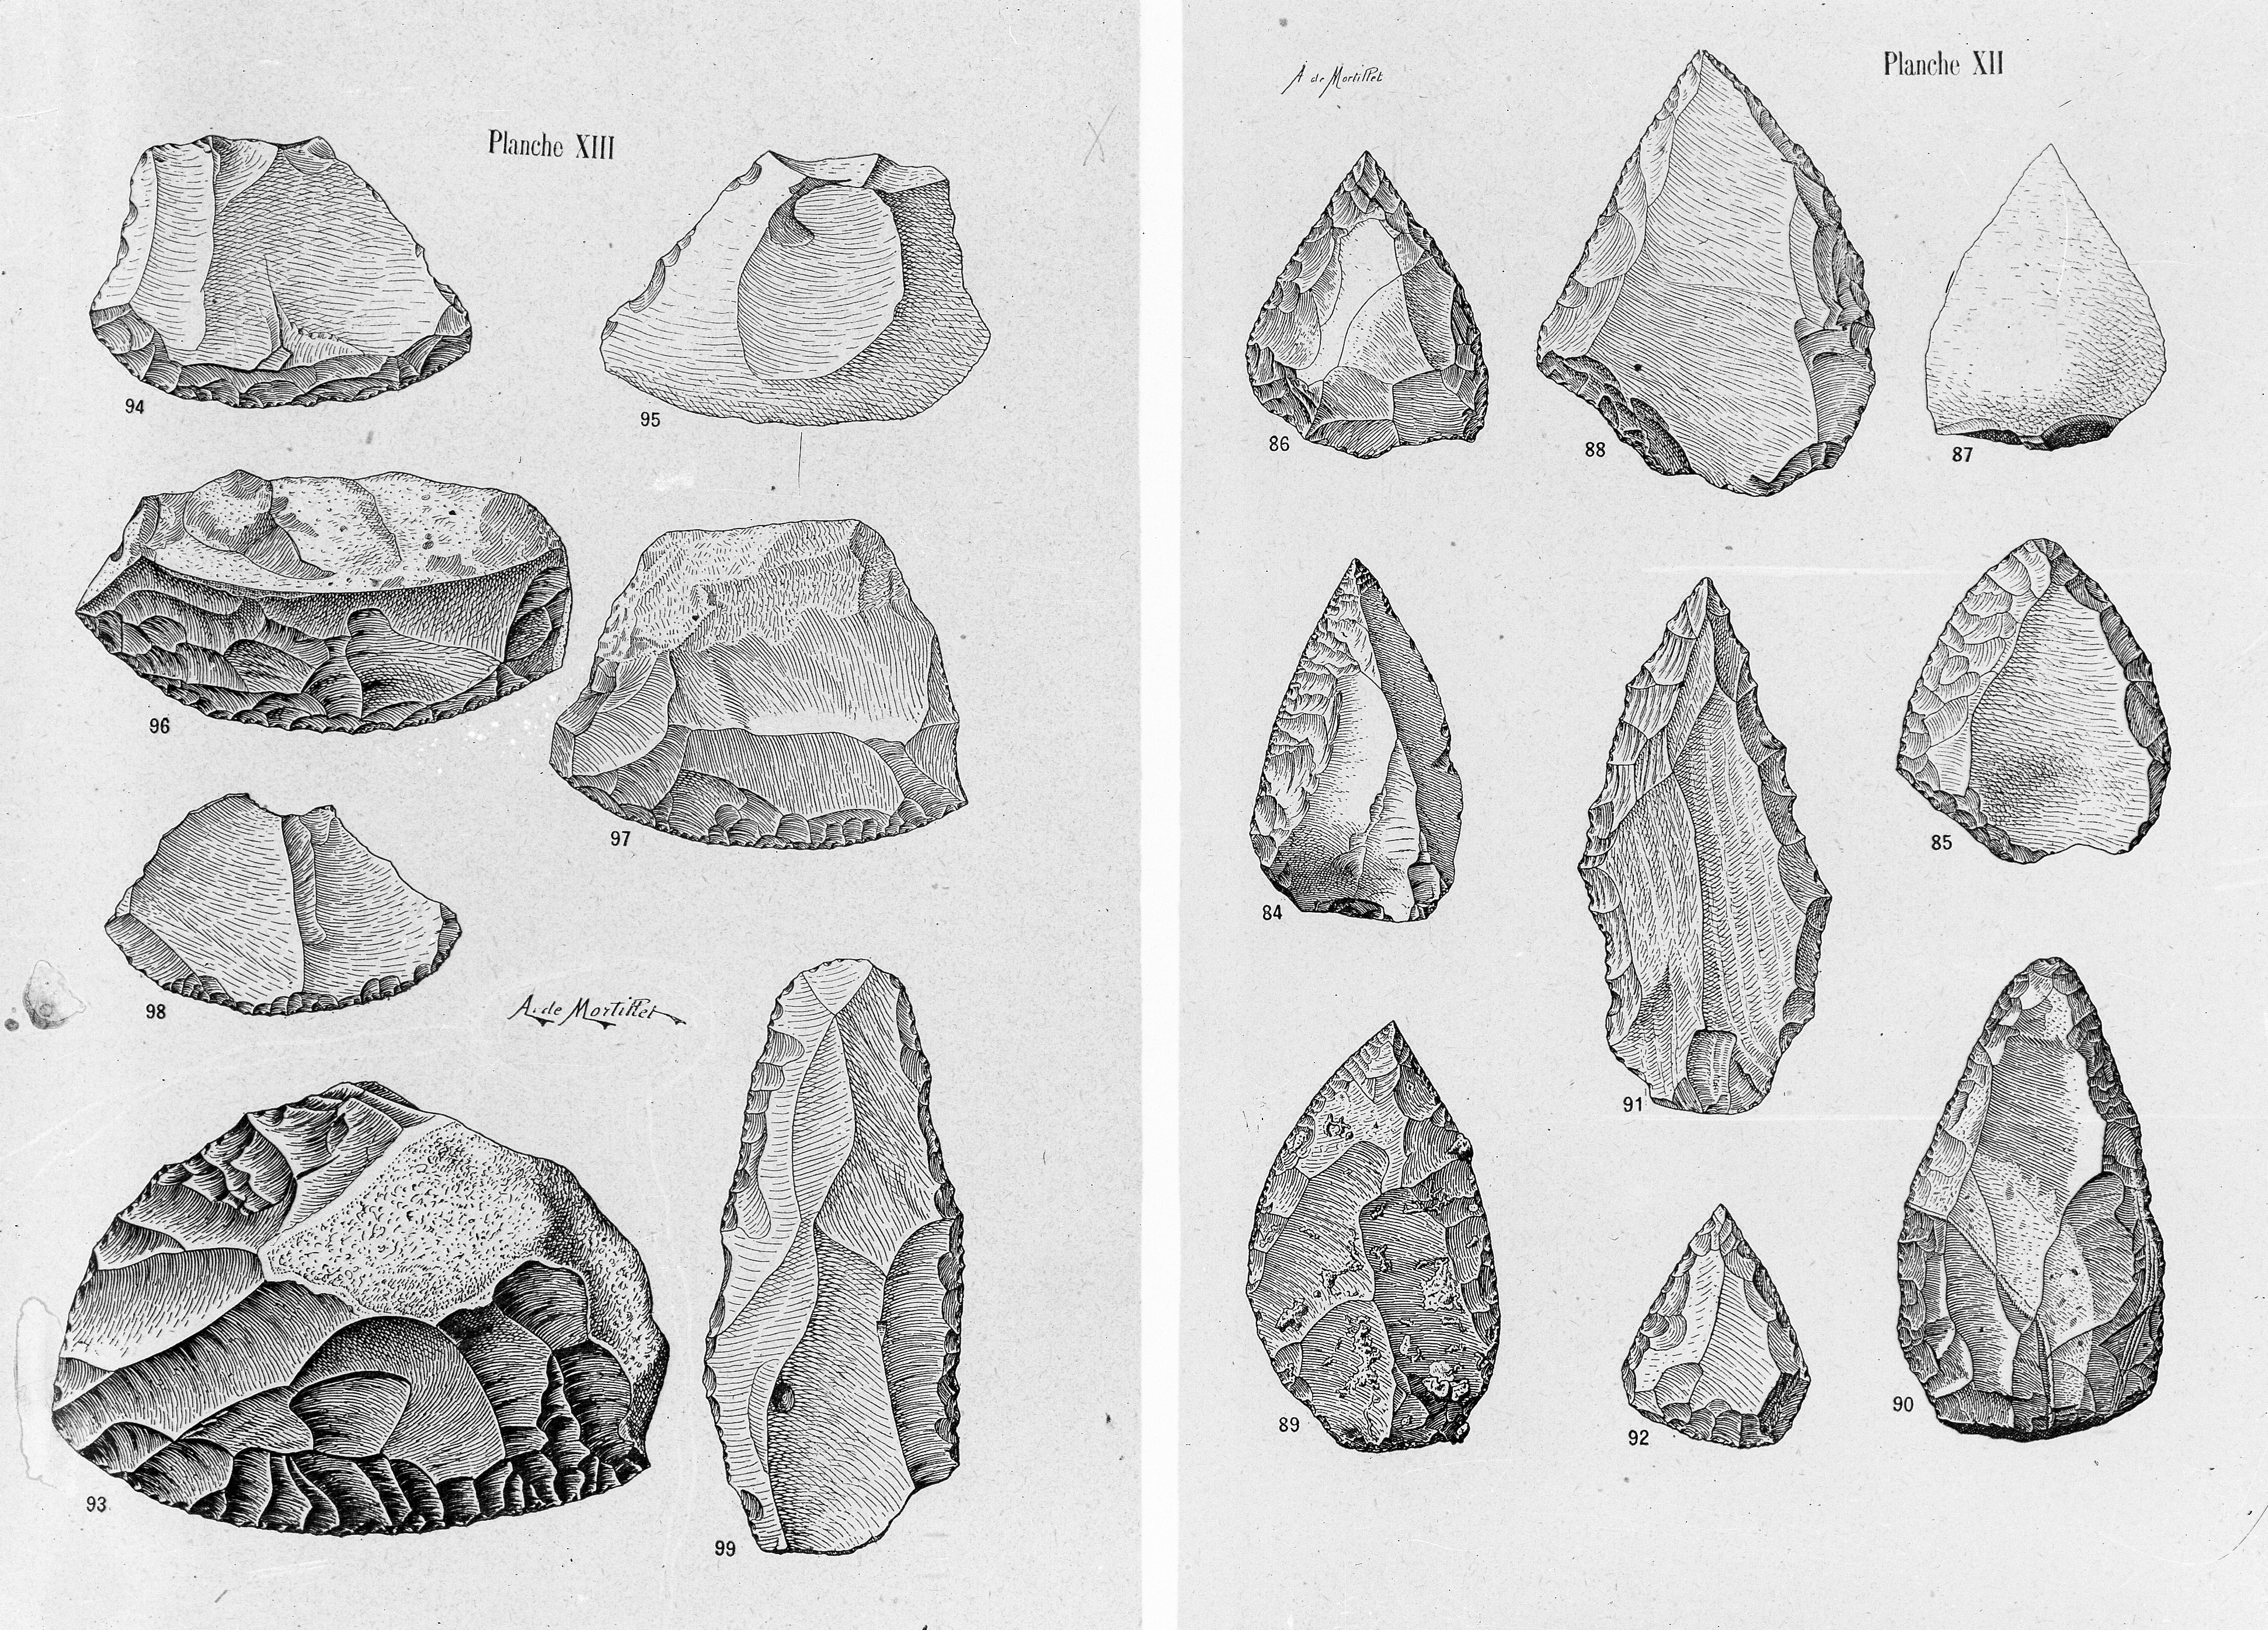 Stone Age - Definition, Tools & Periods | HISTORY